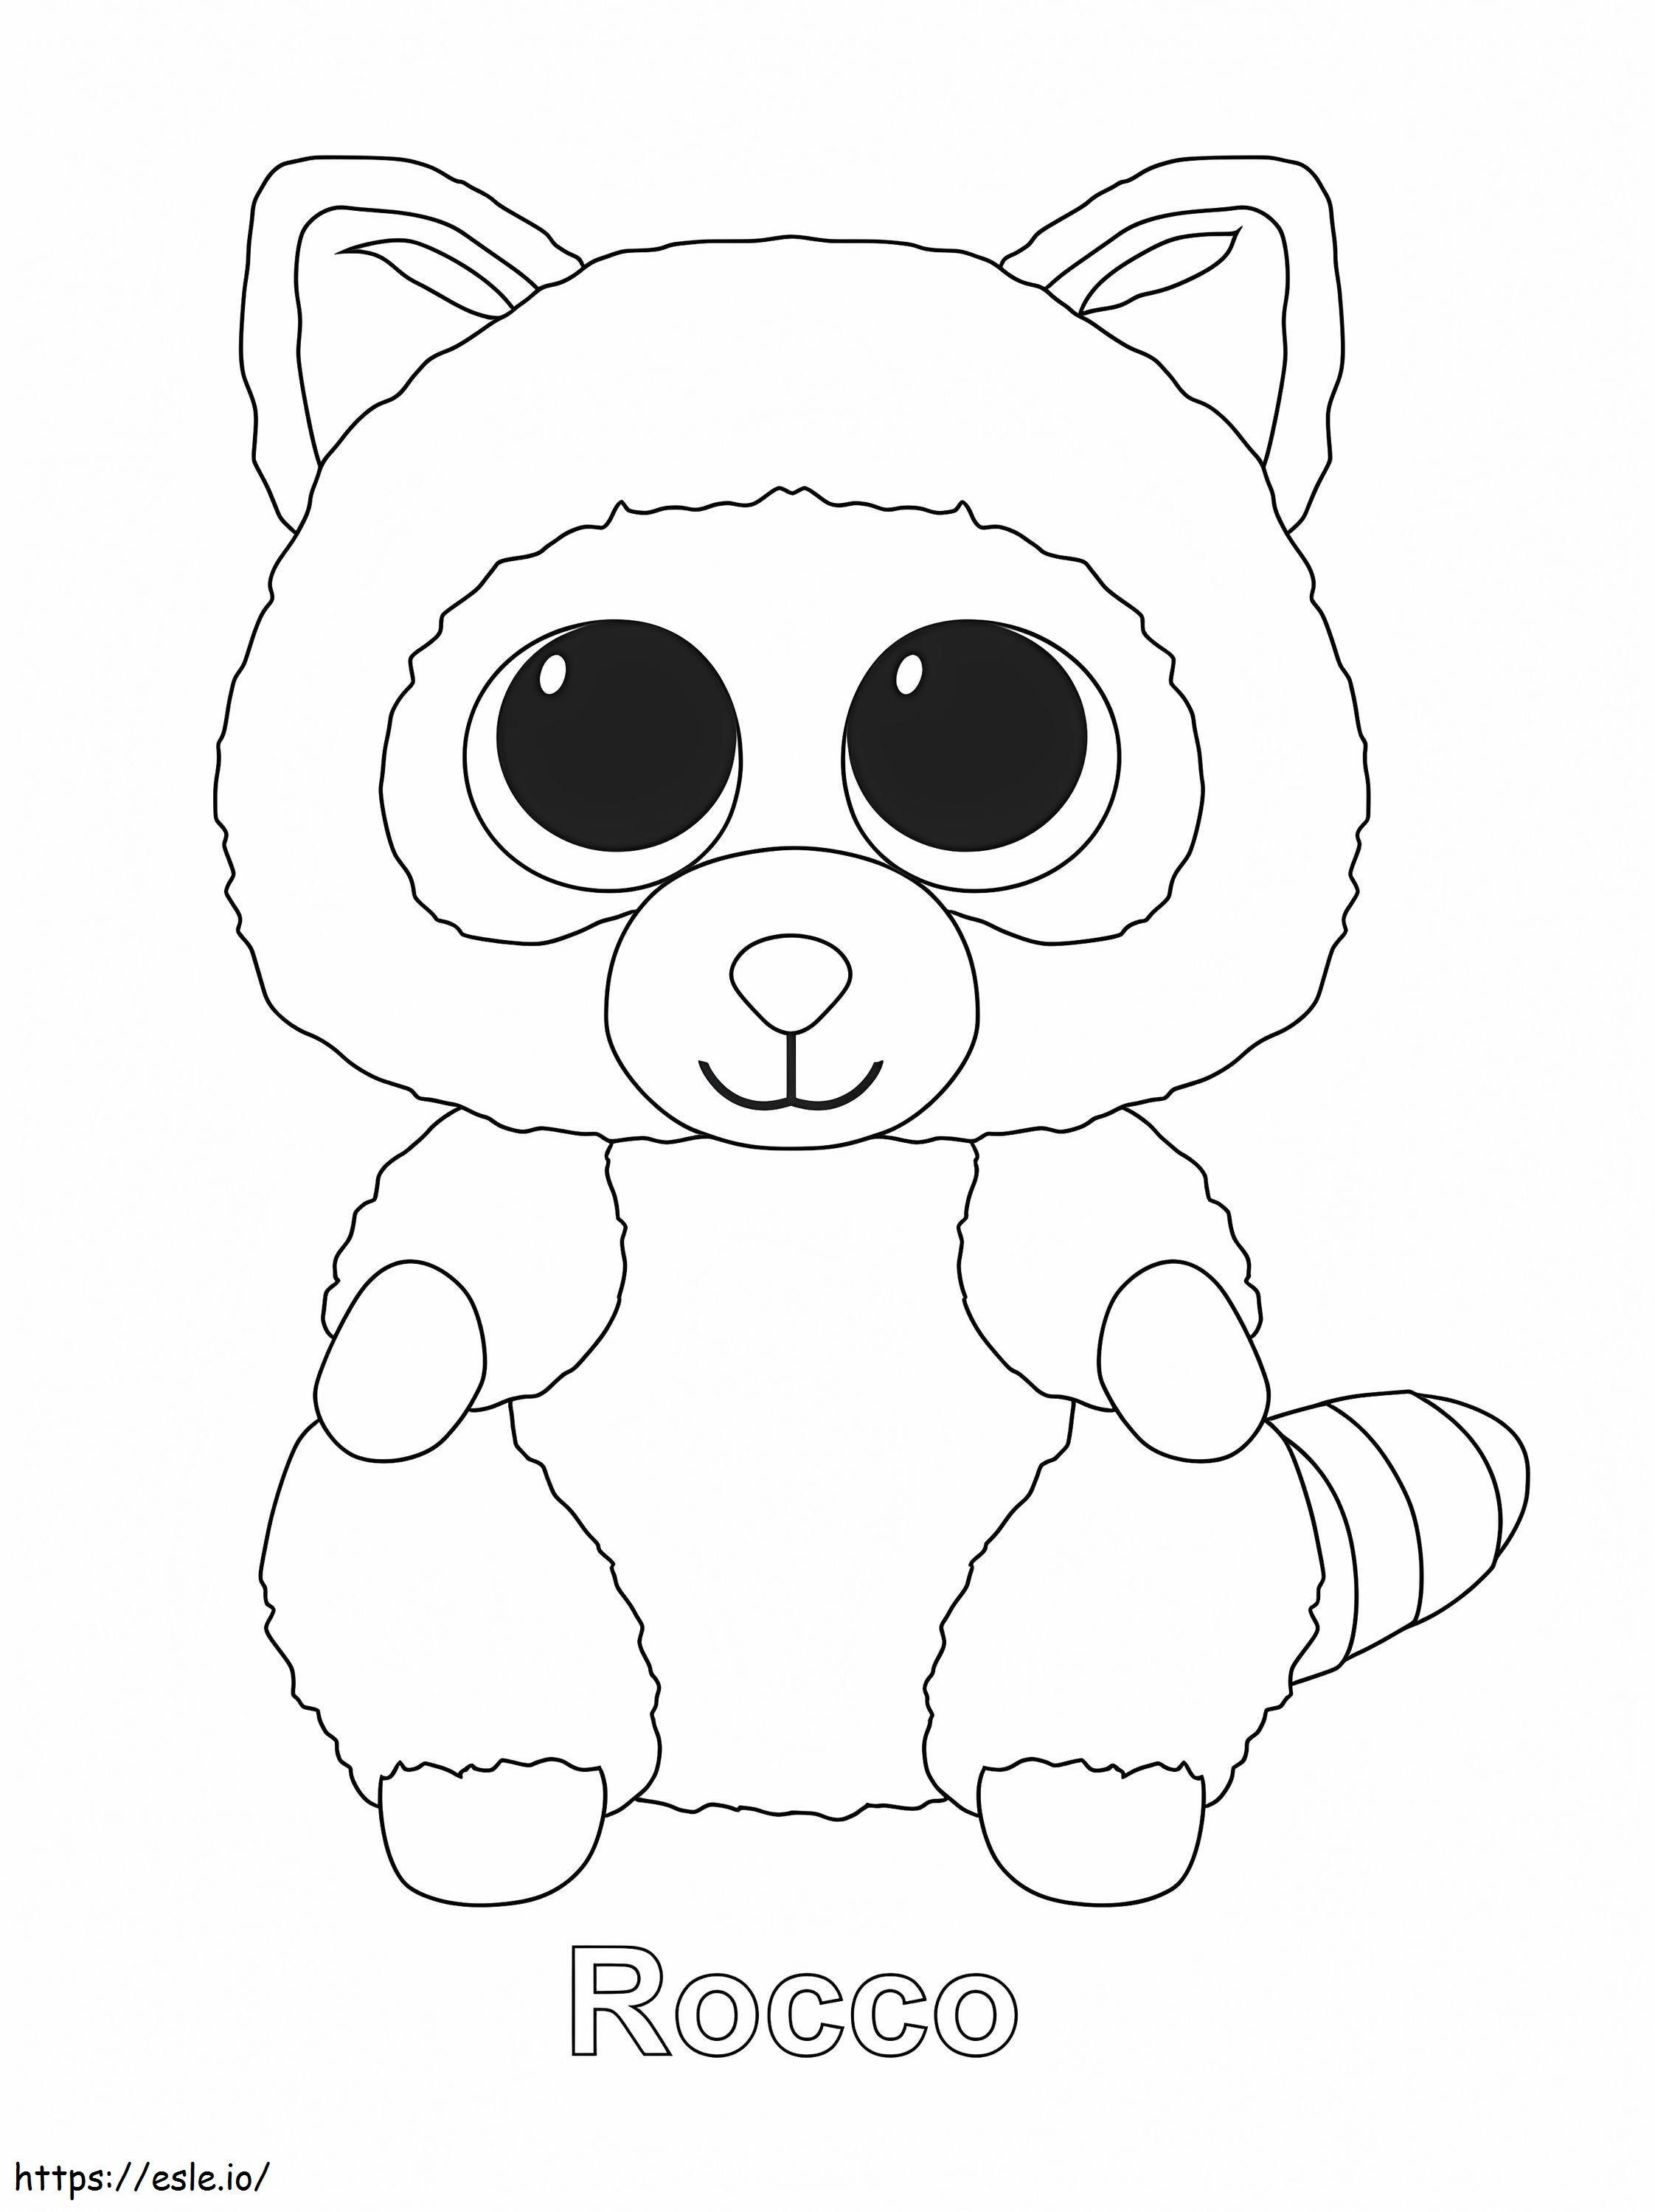 1584153504 Beanie Boos Christmas 4 coloring page